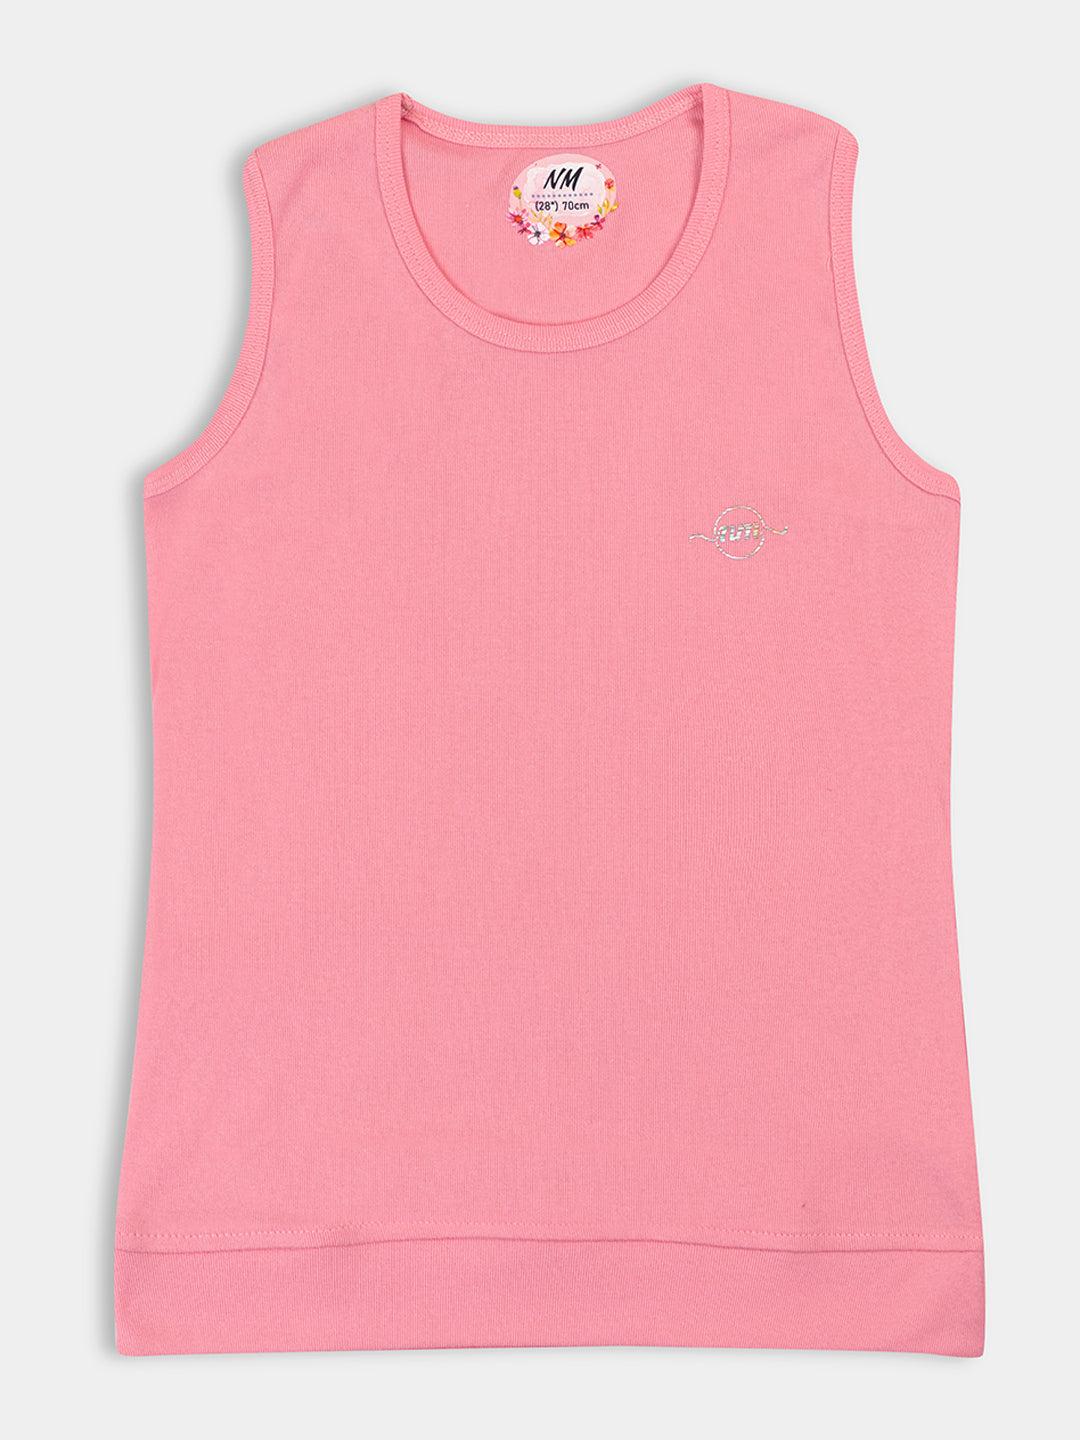 Adorable Girls' Sleeveless Top 5-Combo: Solid Colors